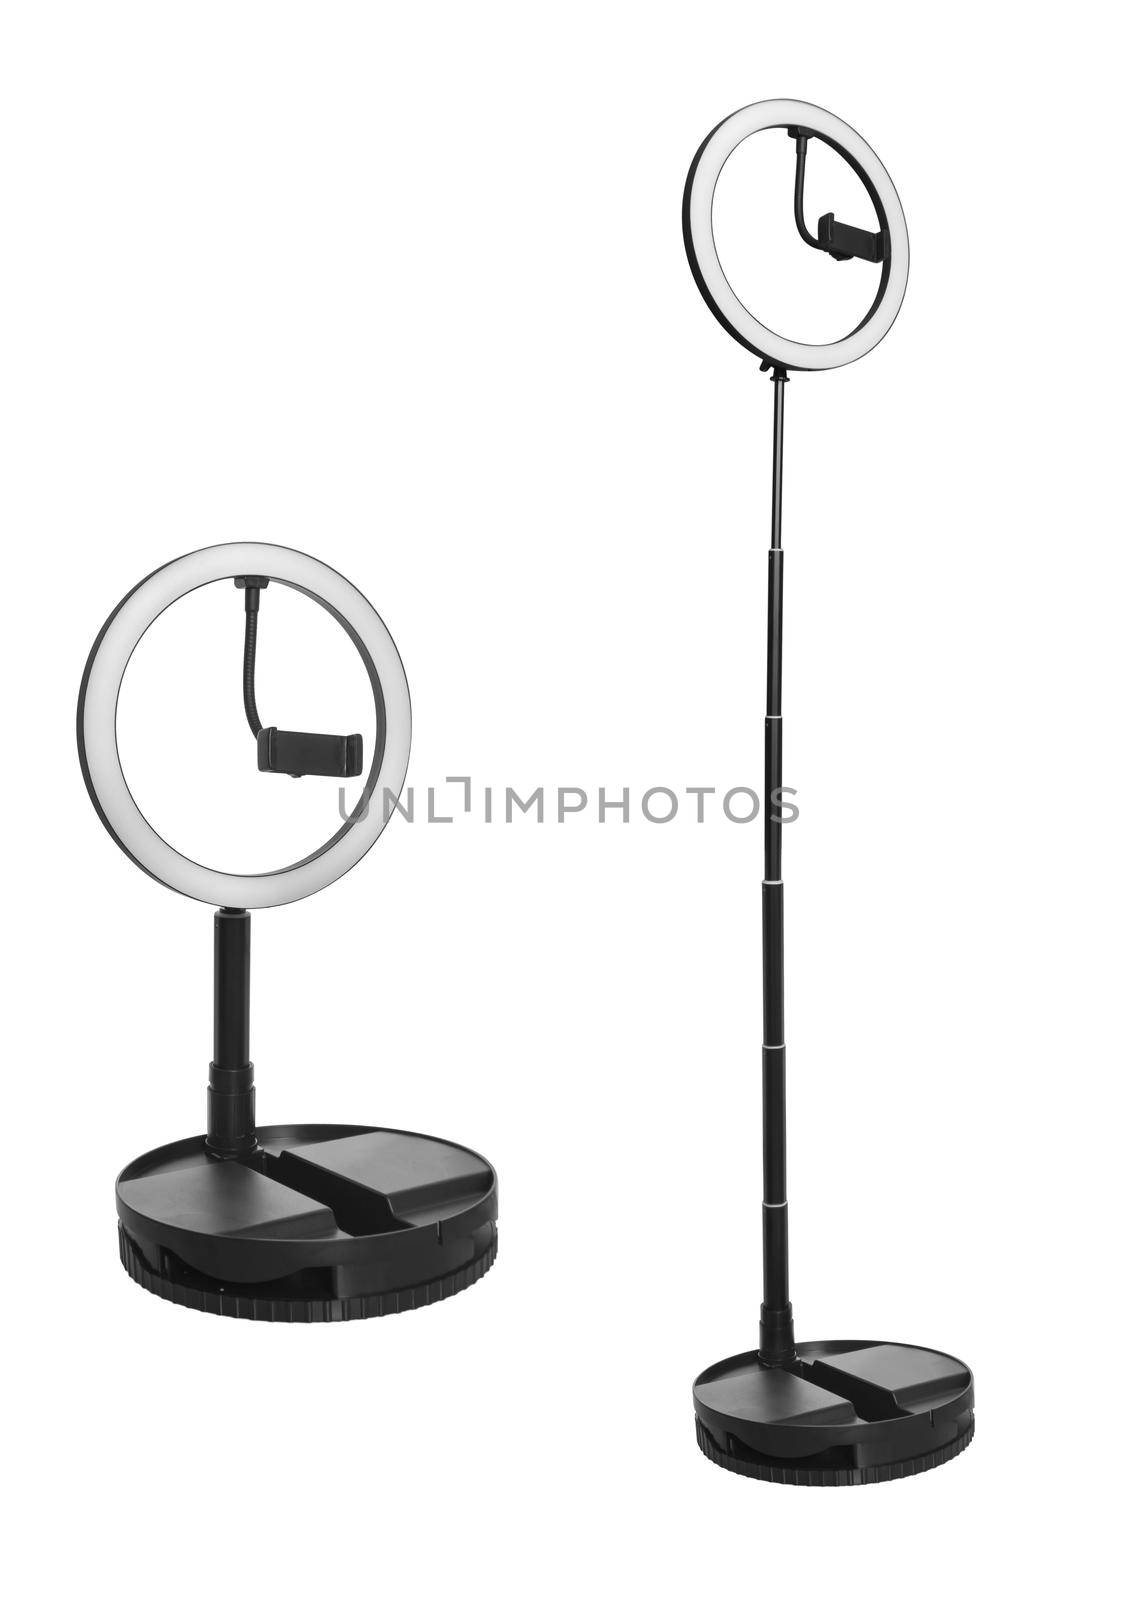 Selfie lamp, ring lamp with tripod and phone mount, isolated on white background by A_A